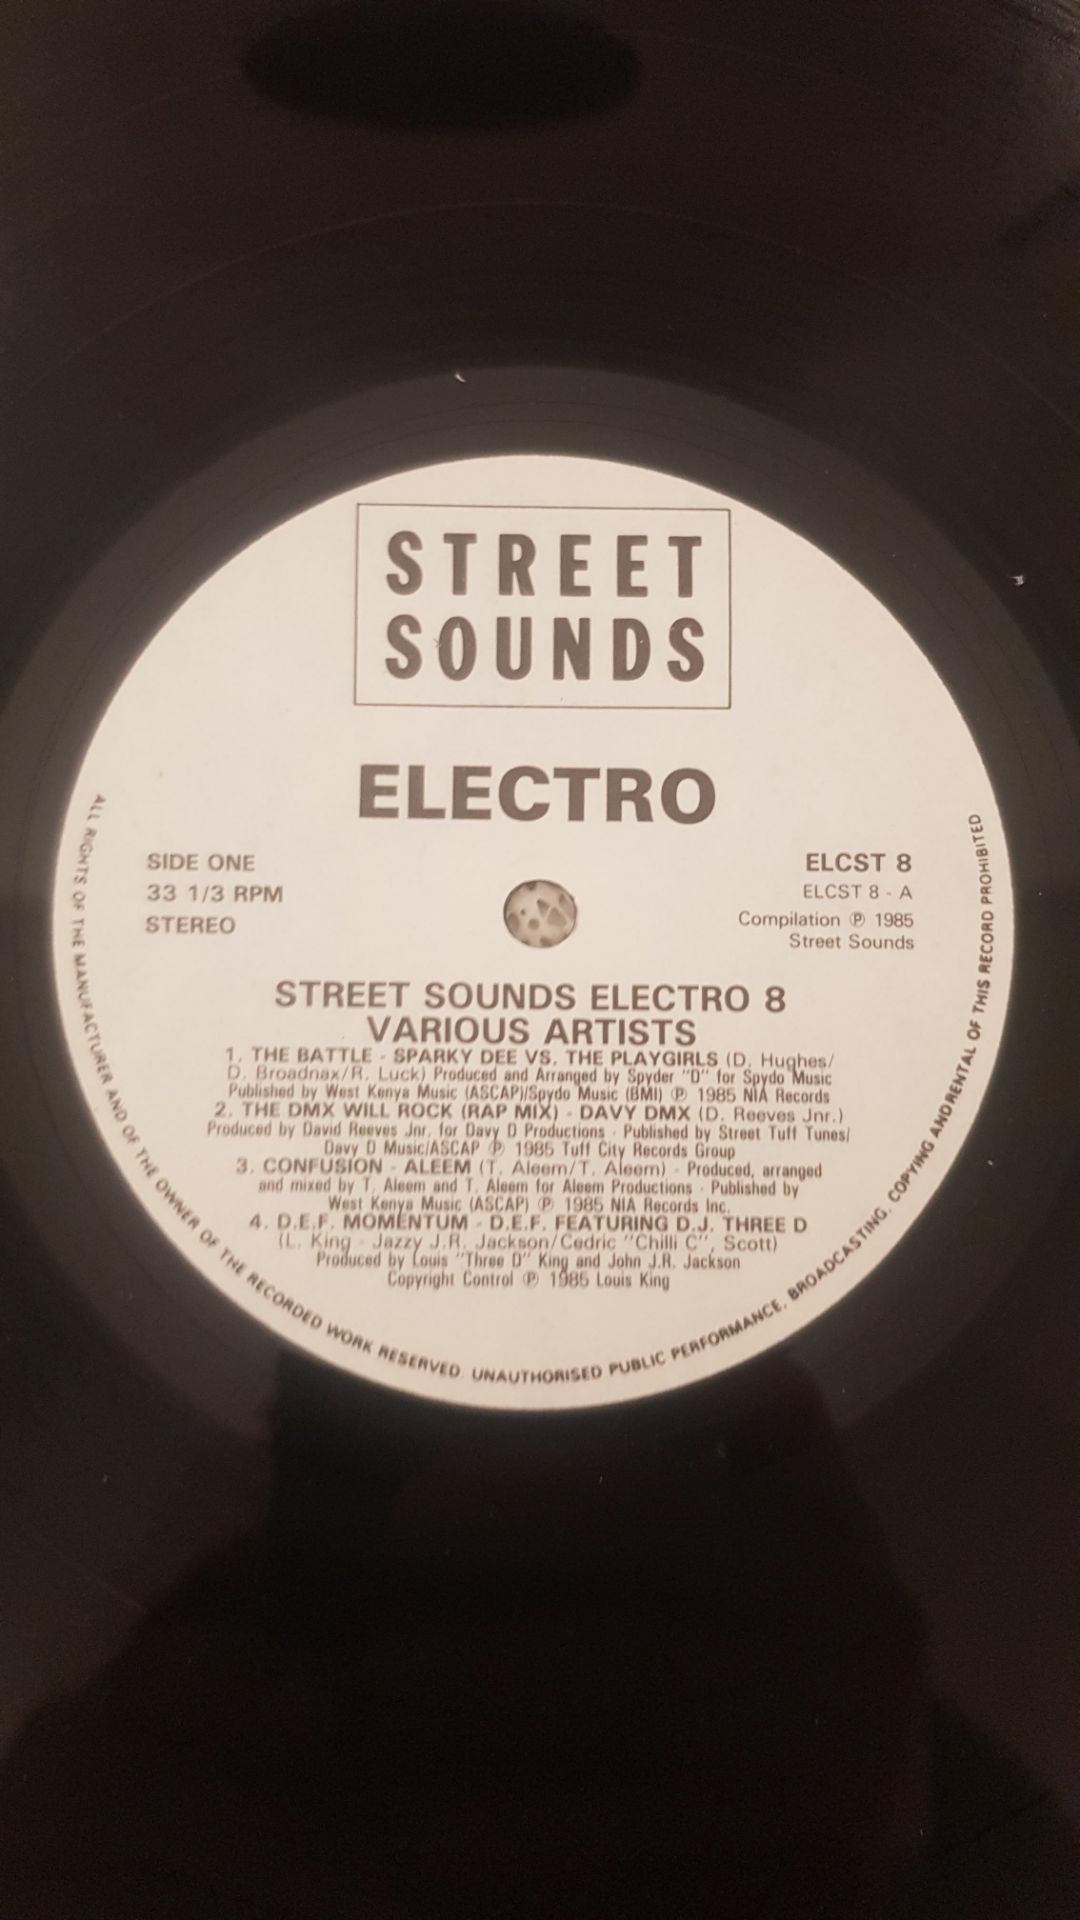 4 X Vinyl. 1 X Street Sounds Electro 8 Various Artists 1986 (No Cover), 1 X Trojan Records Tighte - Image 2 of 5